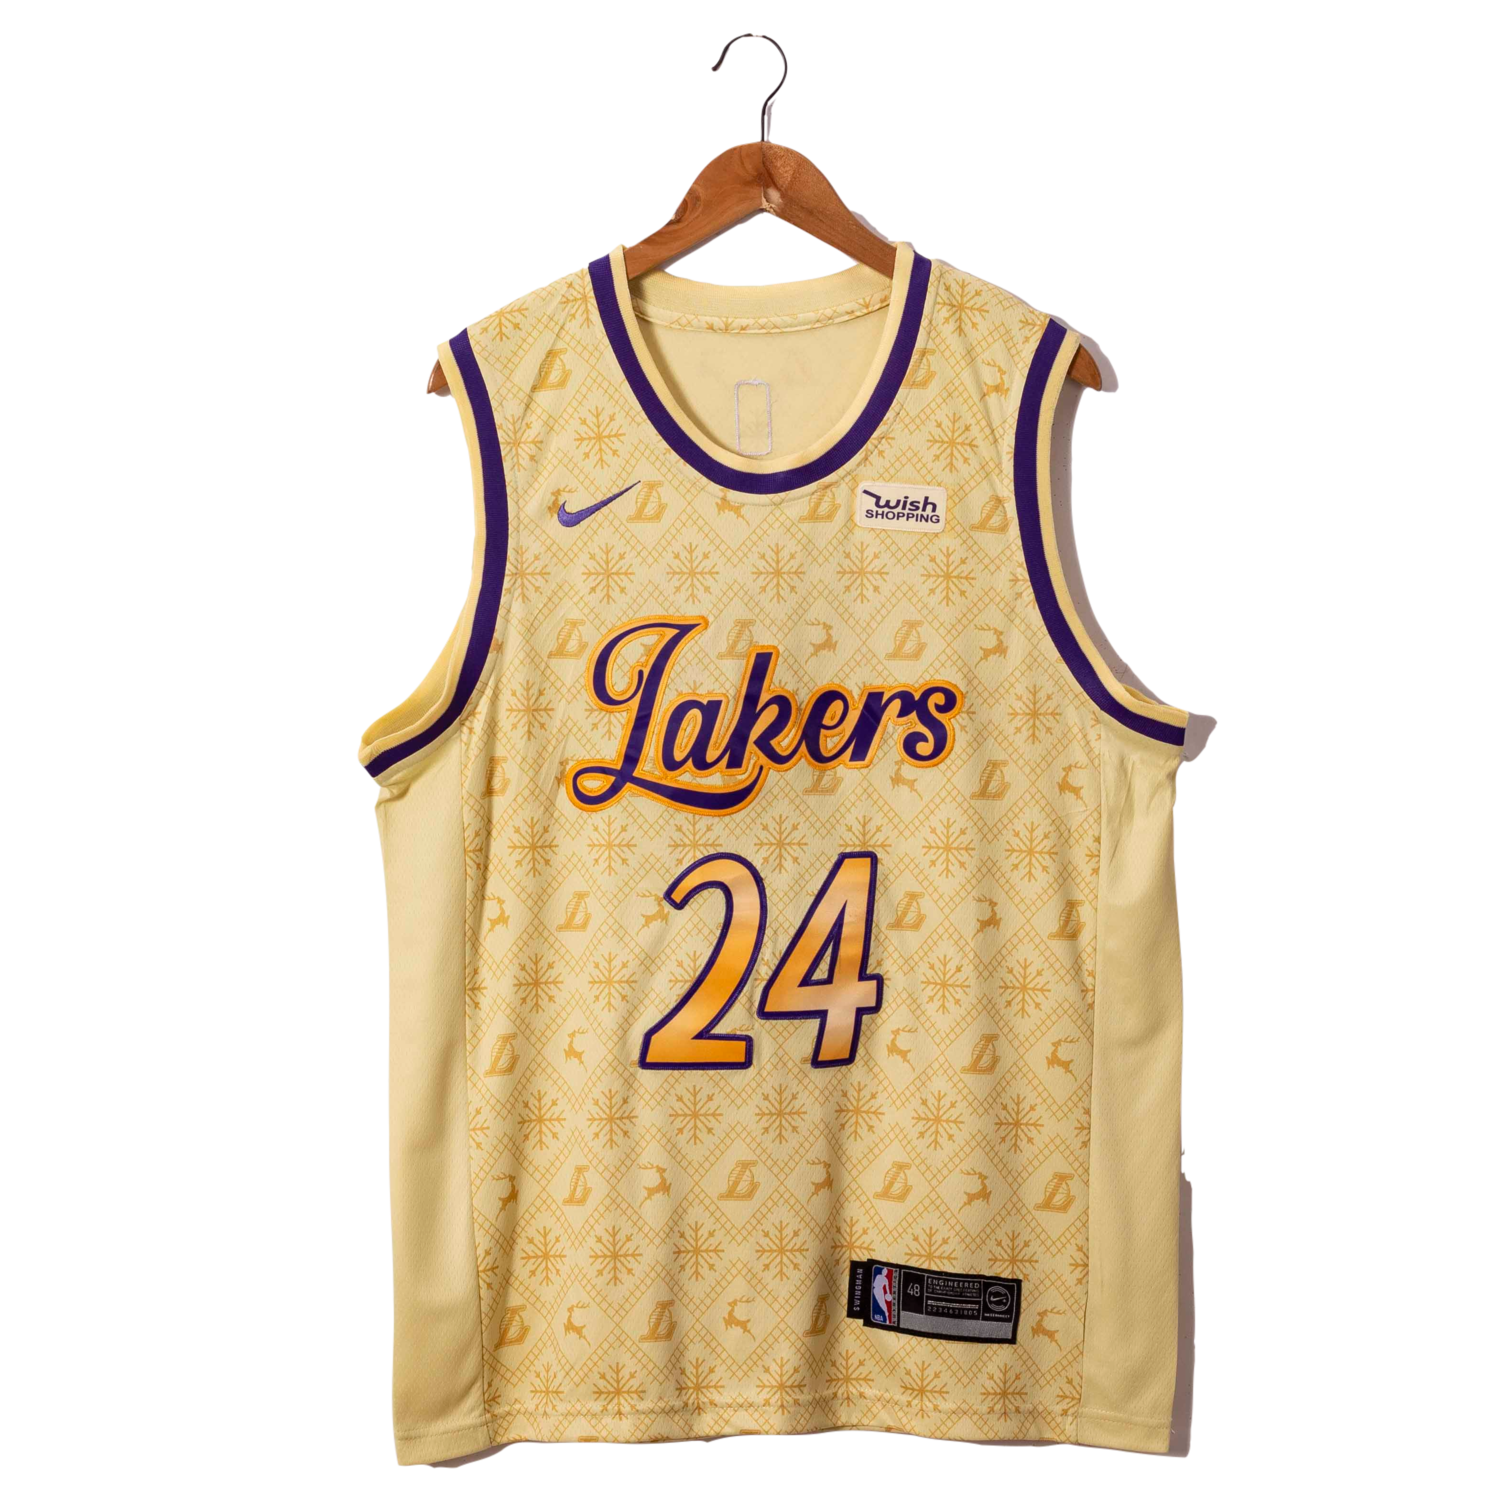 lakers 24 jersey